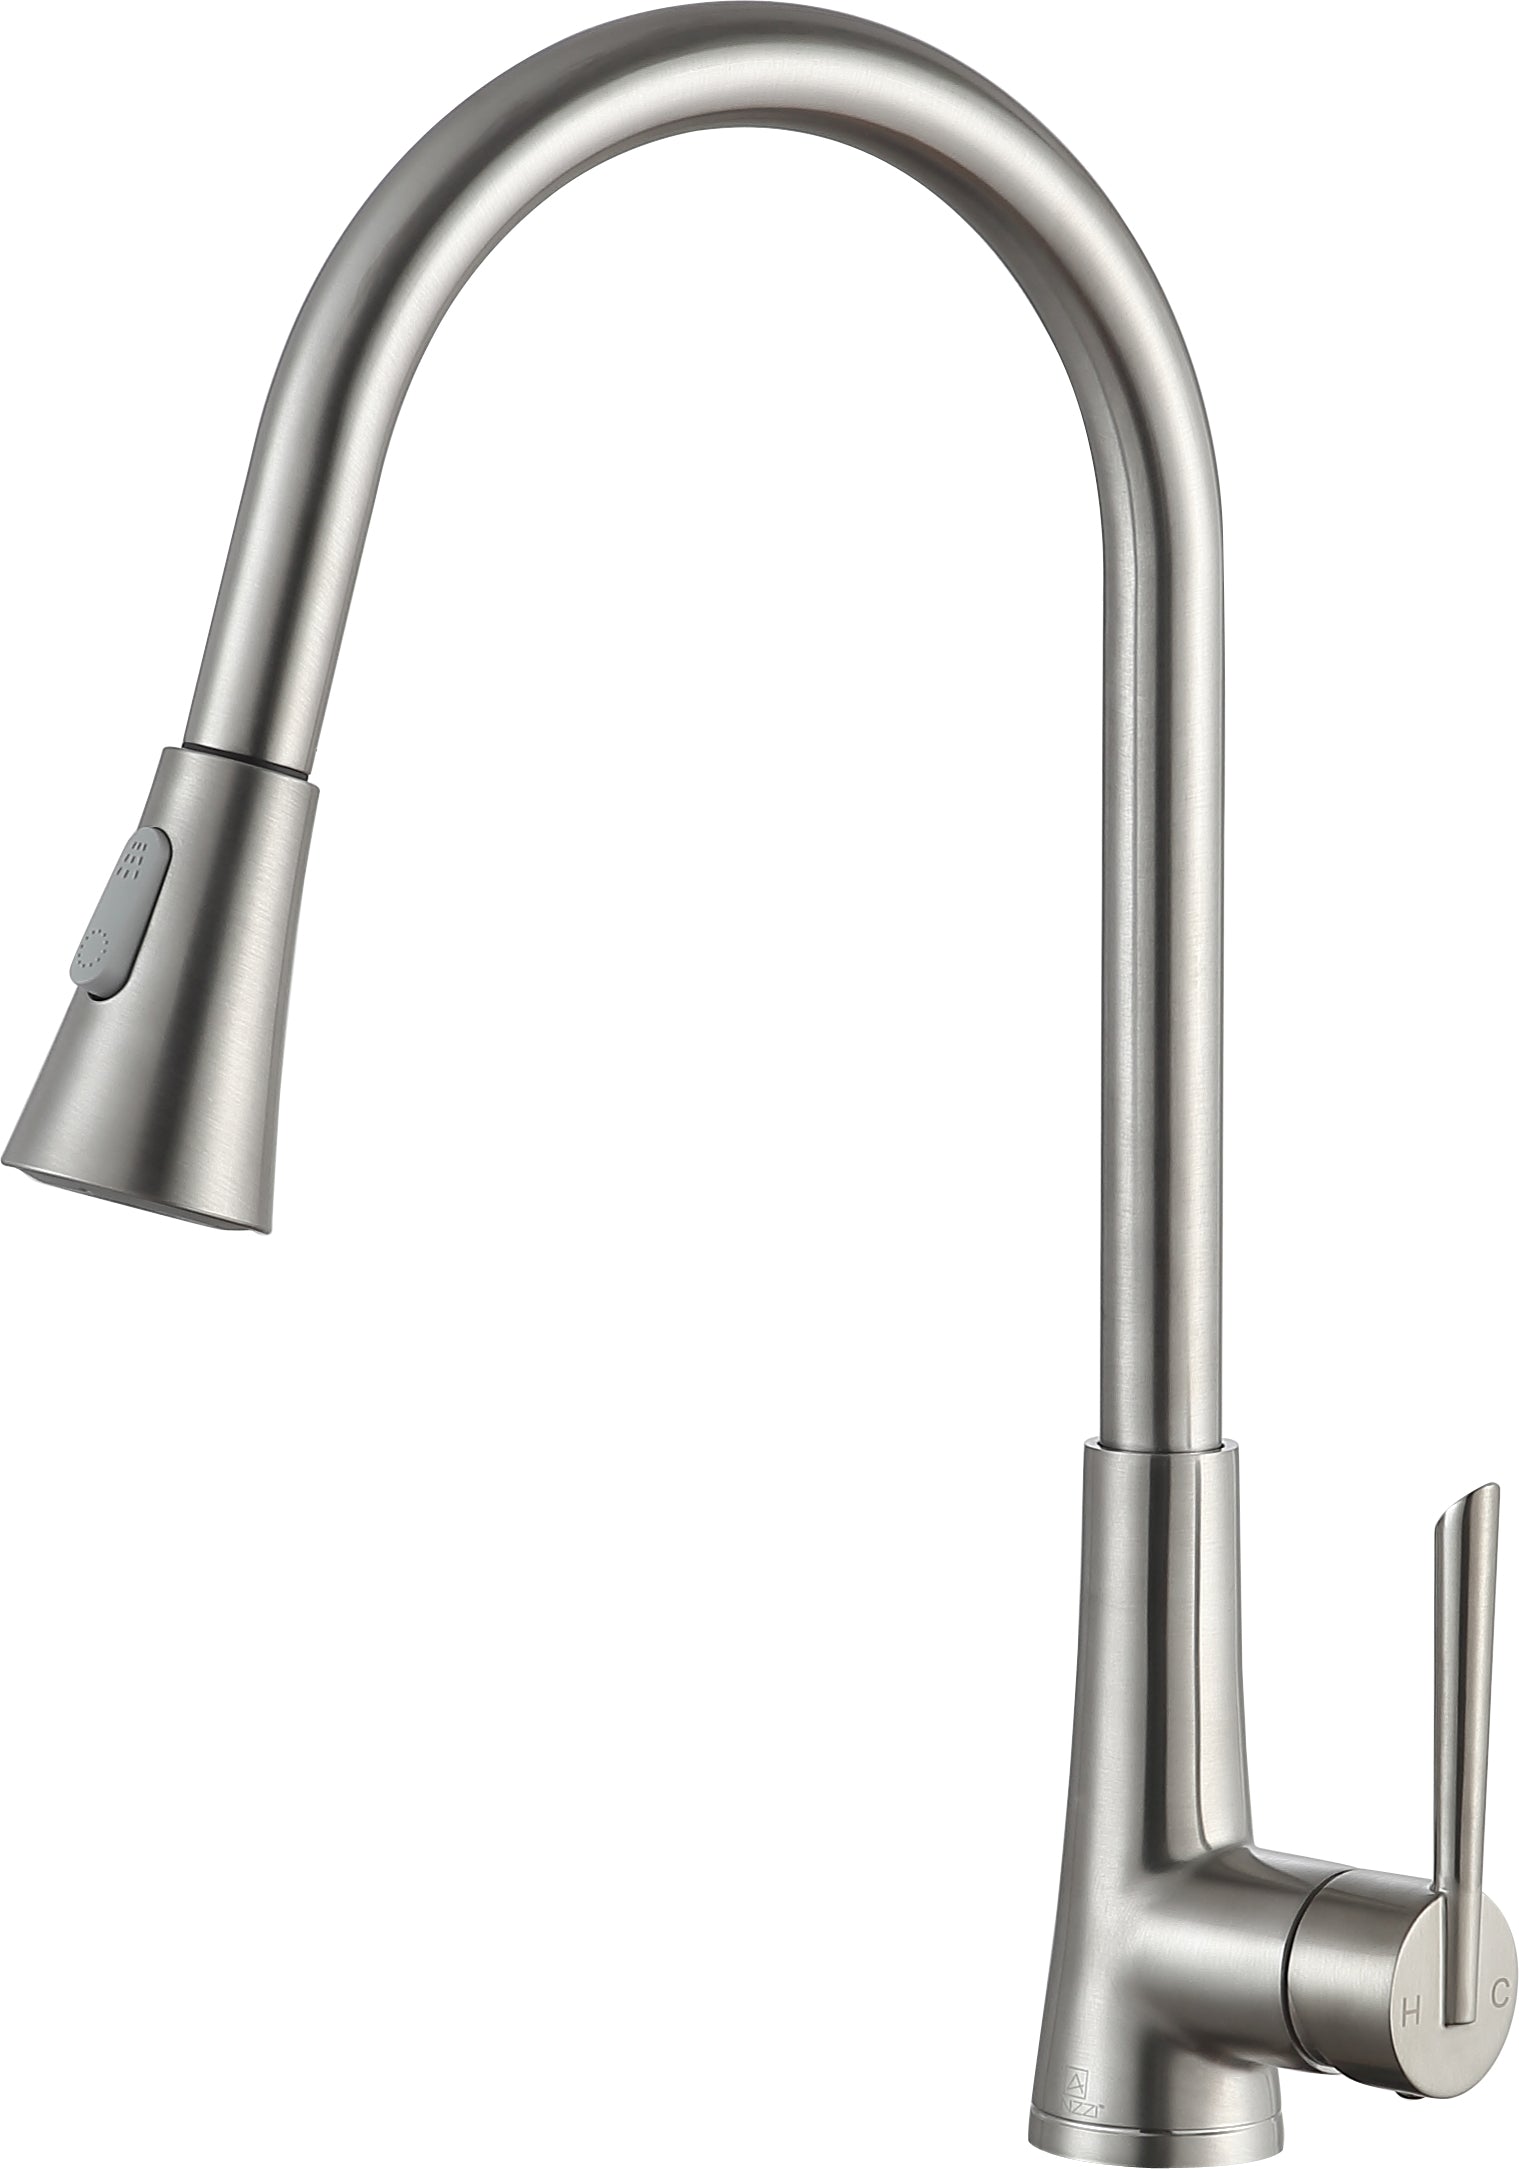 KF-AZ216BN - Tulip Single-Handle Pull-Out Sprayer Kitchen Faucet in Brushed Nickel